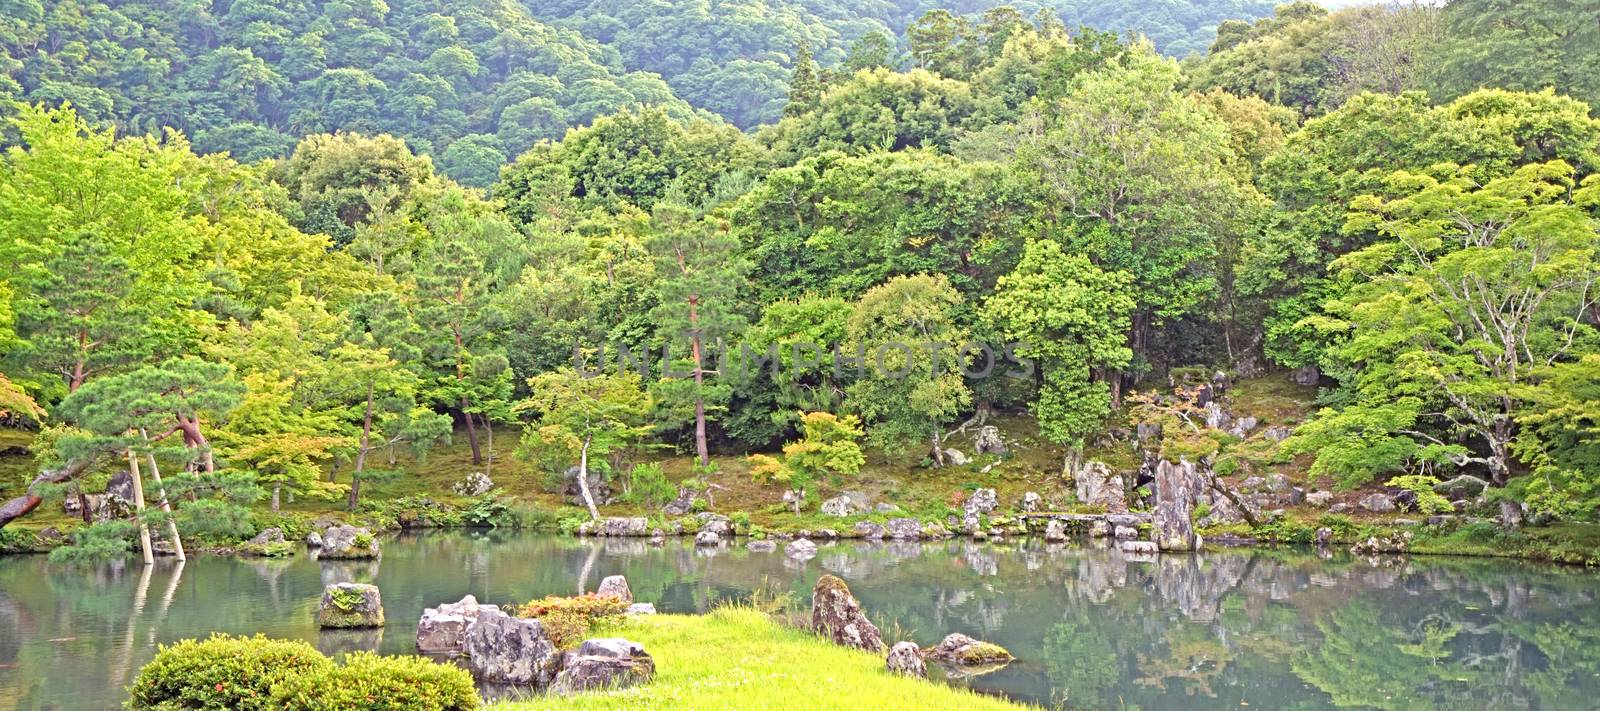 Green plants,  trees, mountain, lake with reflection in Japan ze by cougarsan